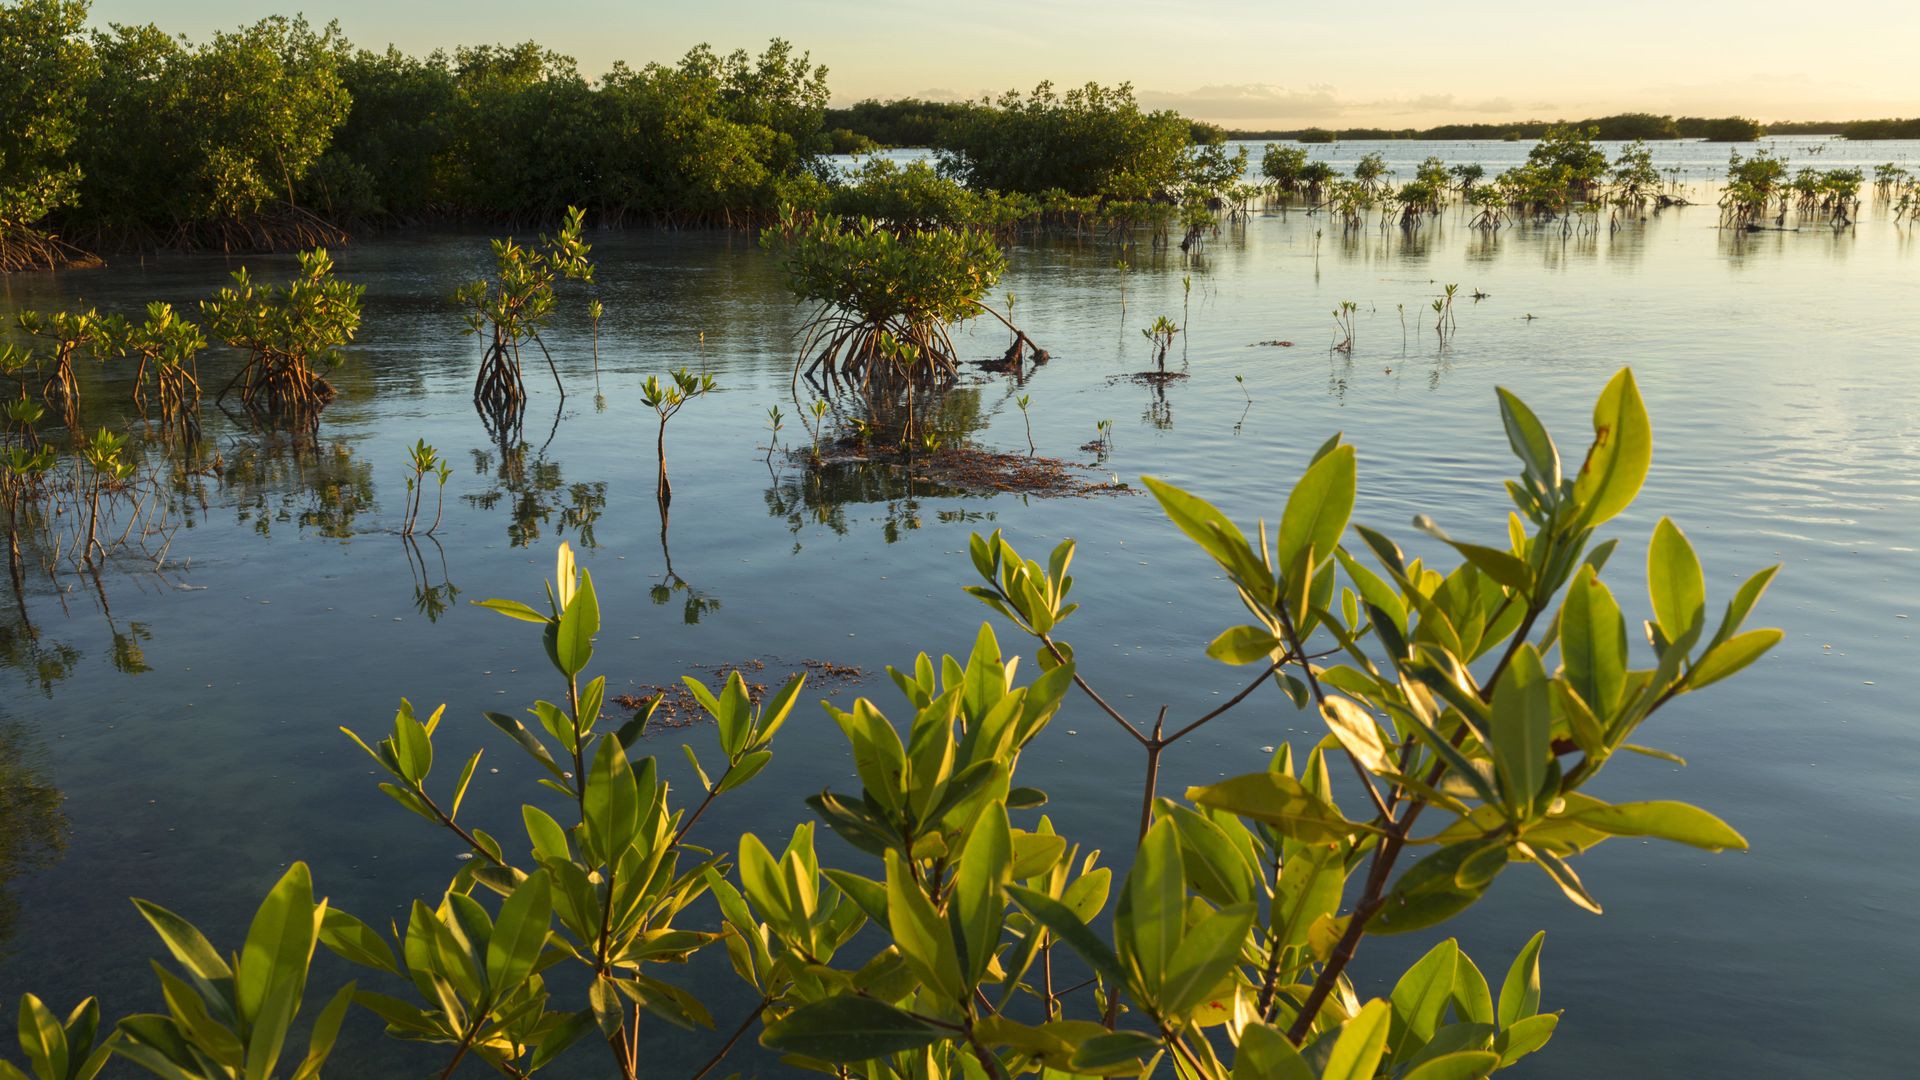 Mangrove forest, which is an ecosystem at particular risk.